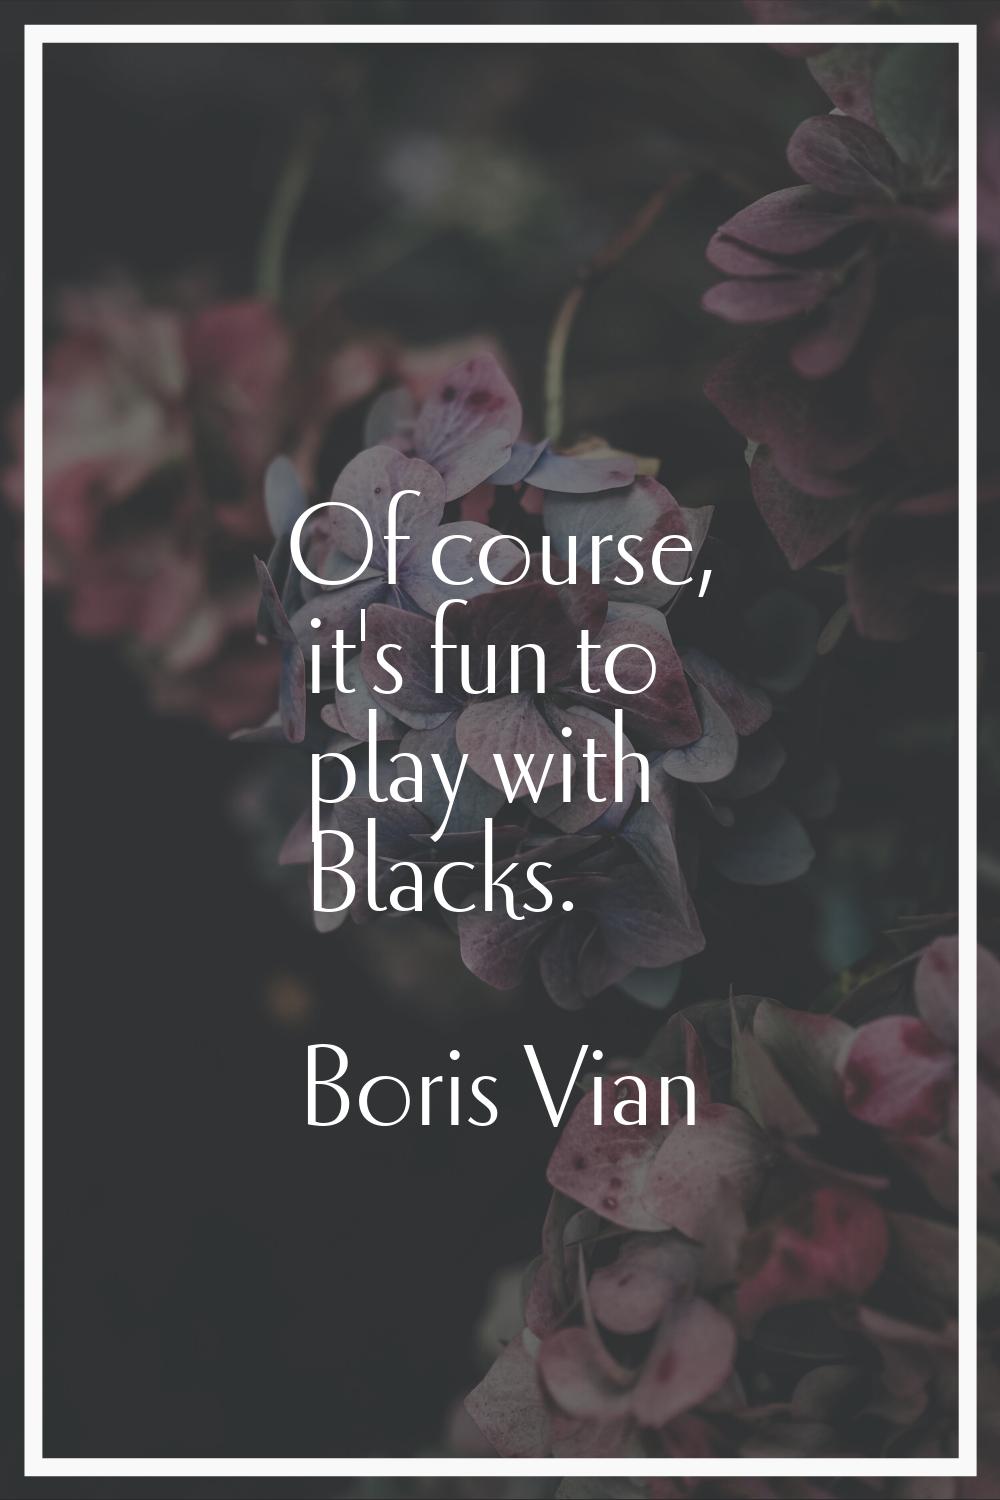 Of course, it's fun to play with Blacks.